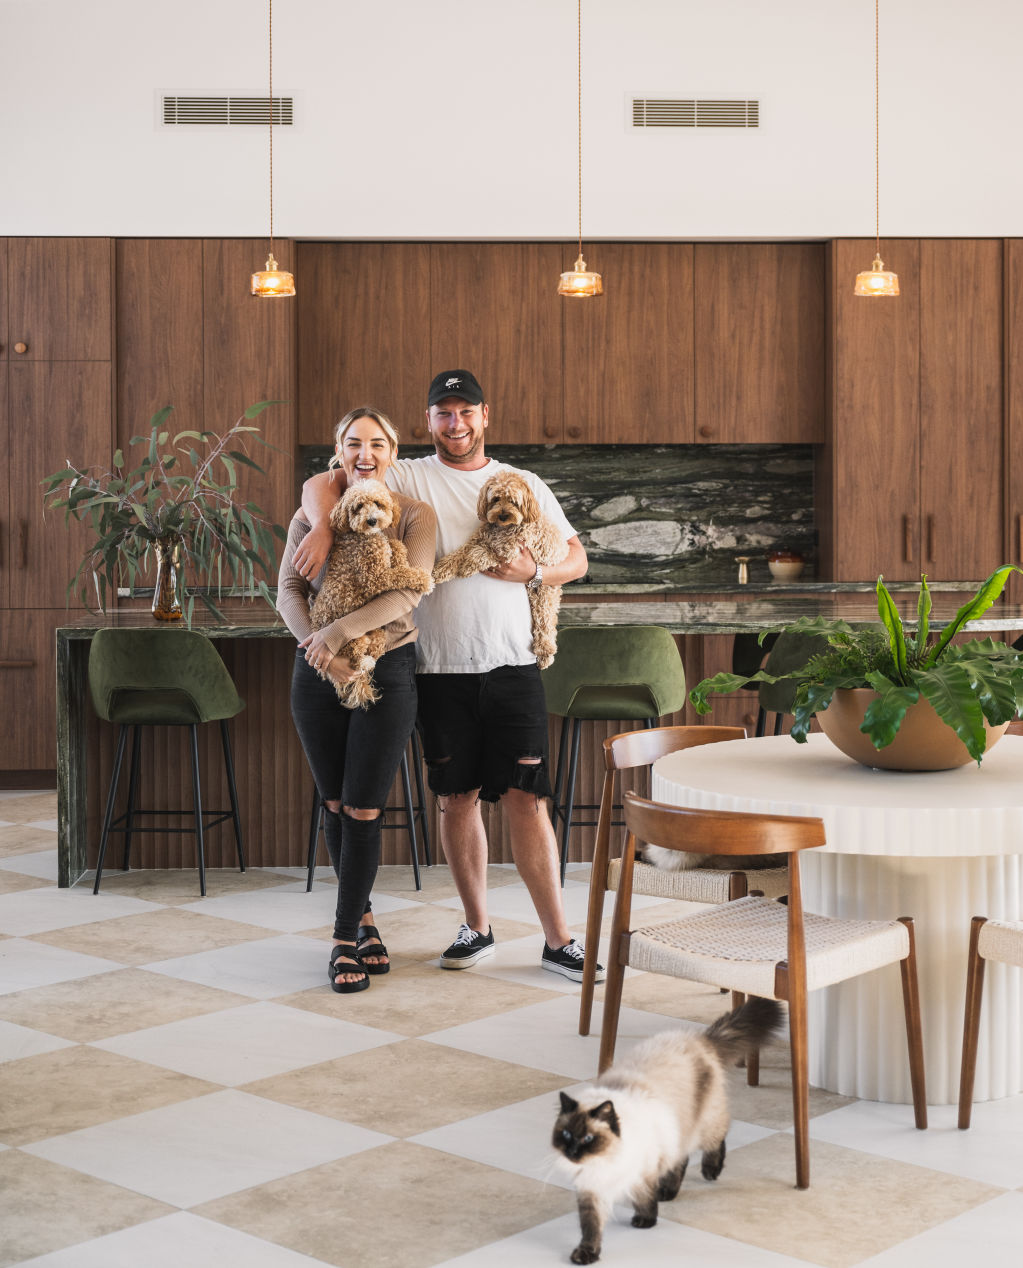 Homeowners Perri and Eddie Beith opted for a mid-century modern style for their latest home renovation project. Photo: HANNAH_PUECHMARIN